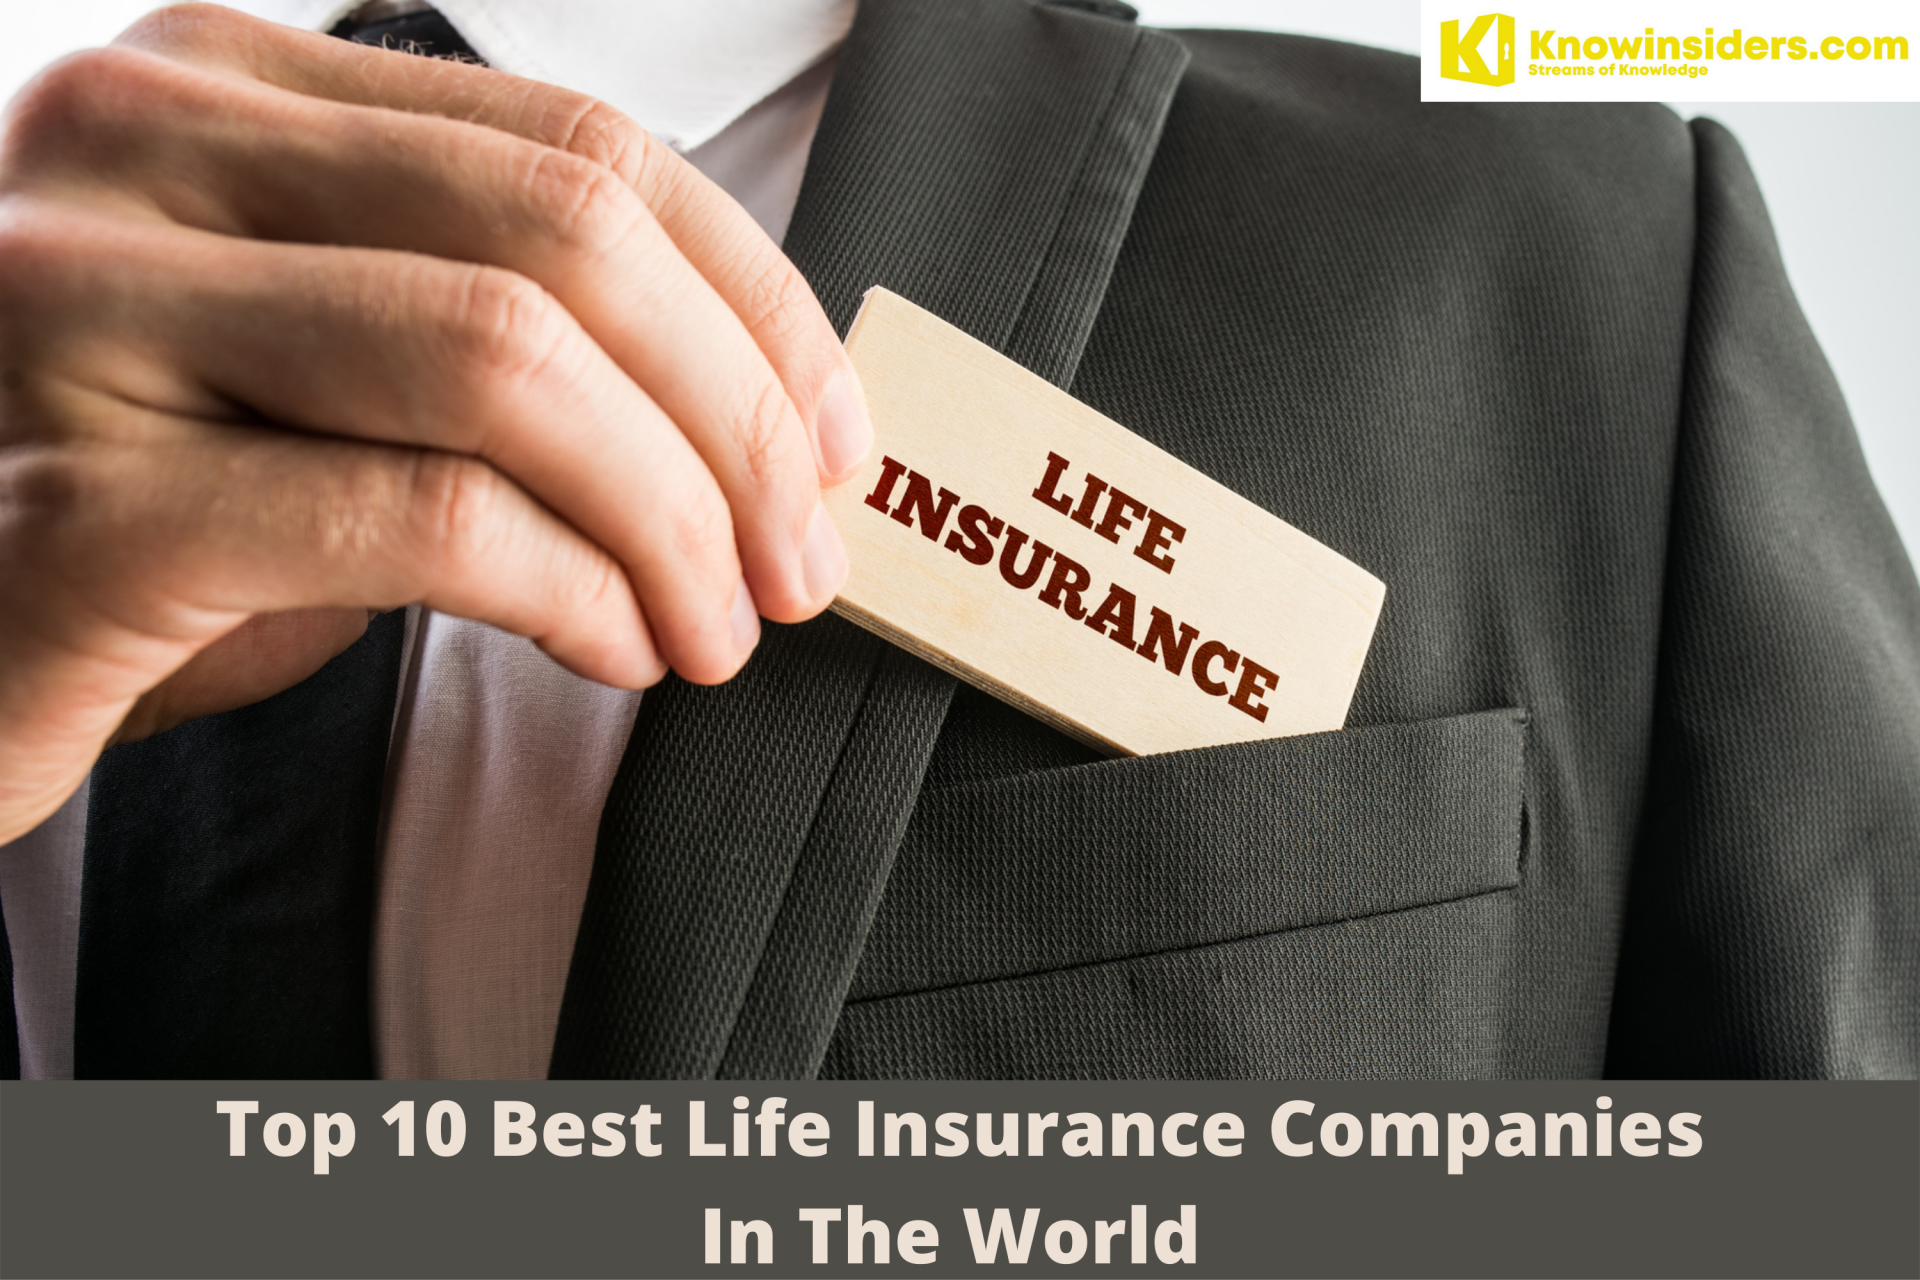 Top 10 Best Life Insurance Companies In The World - Cheapest Quotes